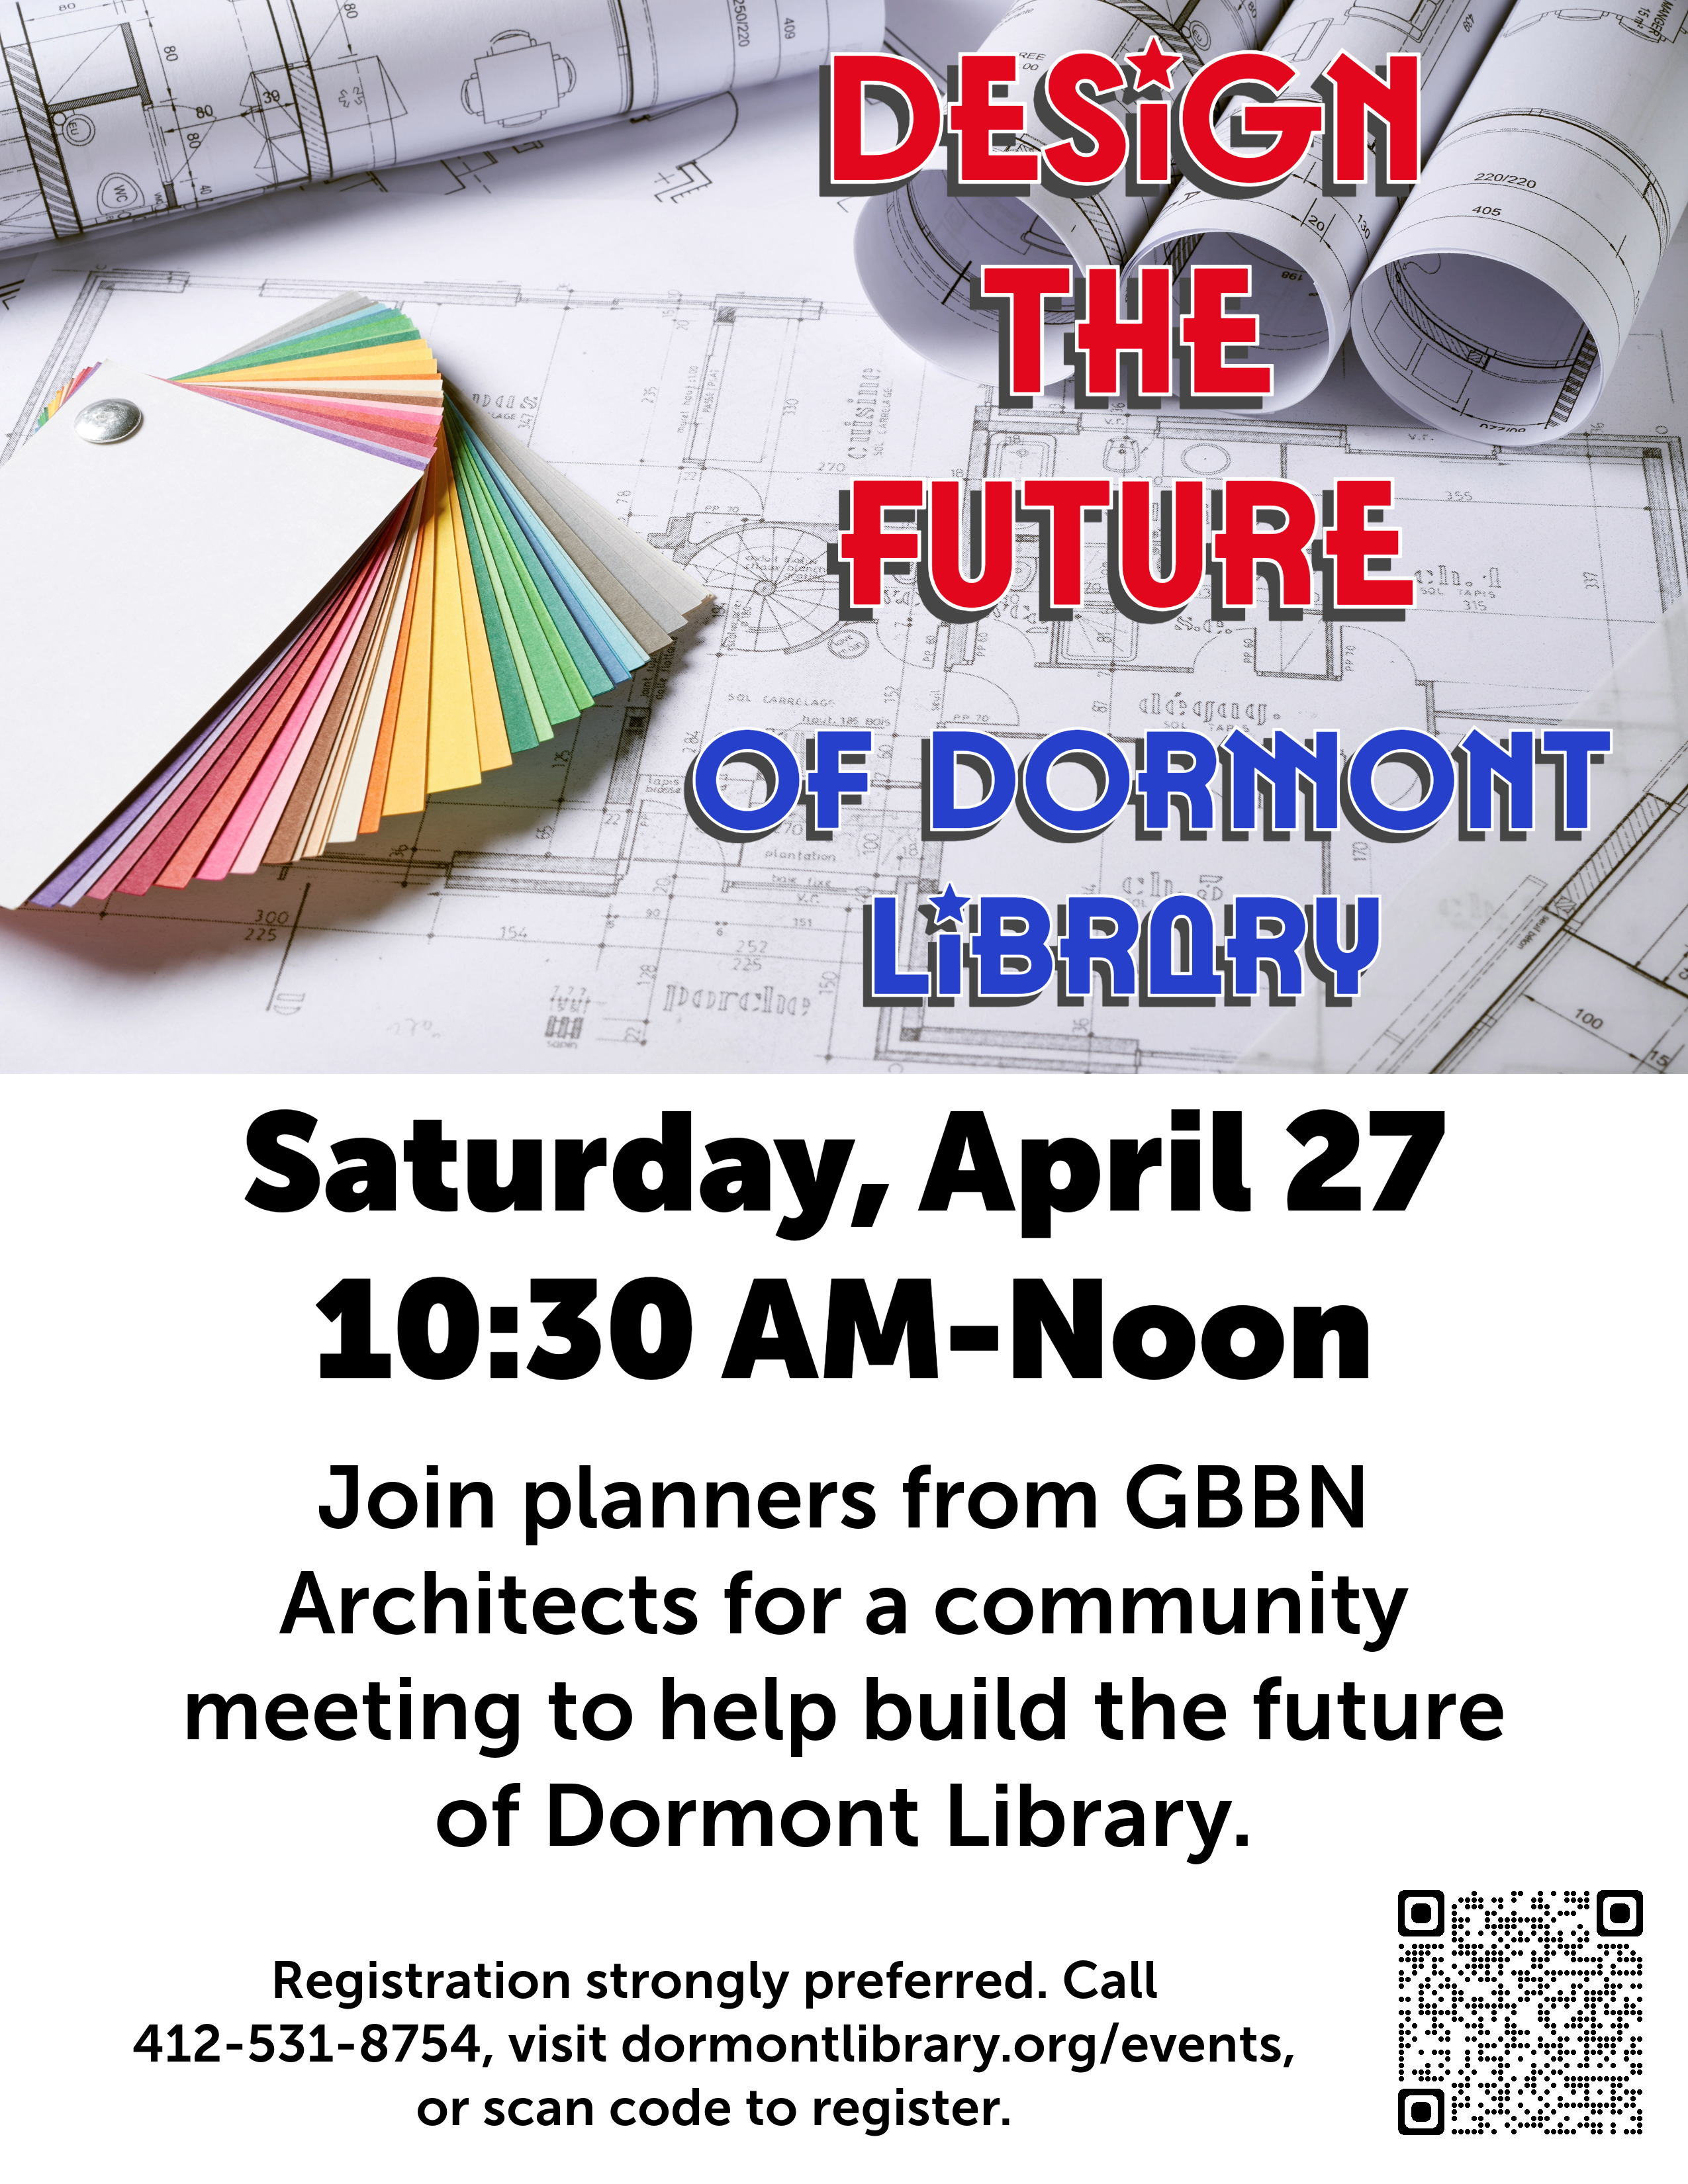 Design the future of Dormont Library! Saturday, April 27, 10:30 AM to Noon. Join planners from GBBN Architects for a community meeting to help build the future of Dormont Library.